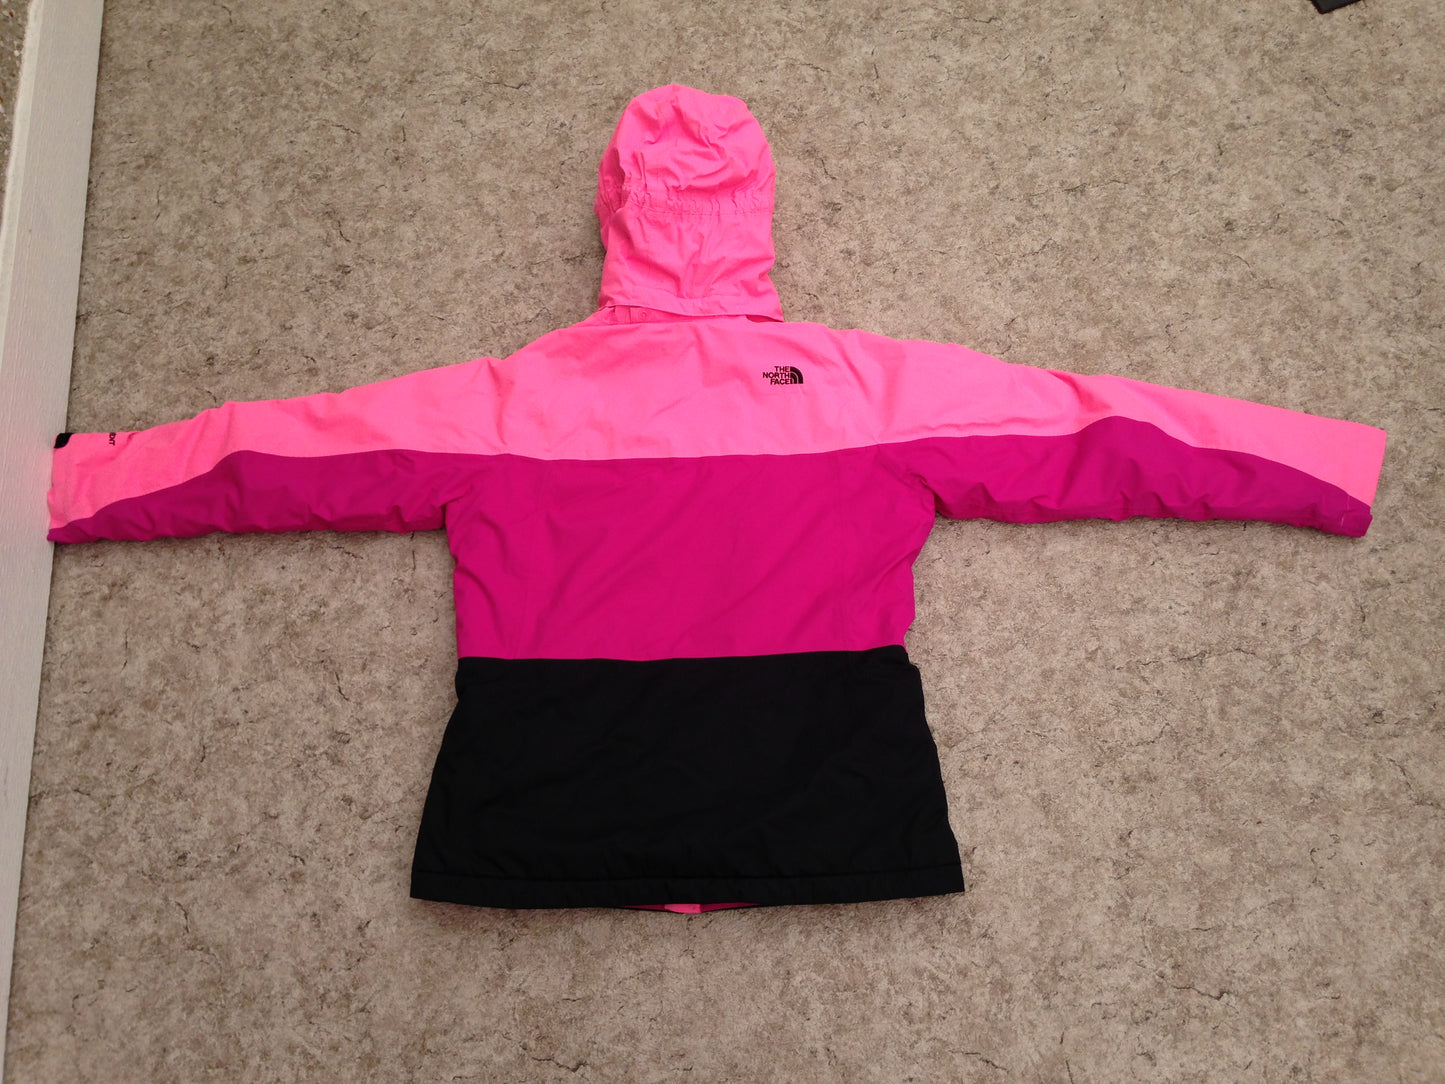 Winter Coat Child Size 14 The North Face Hyvent Snow Boarding Pink Black With Snow Belt